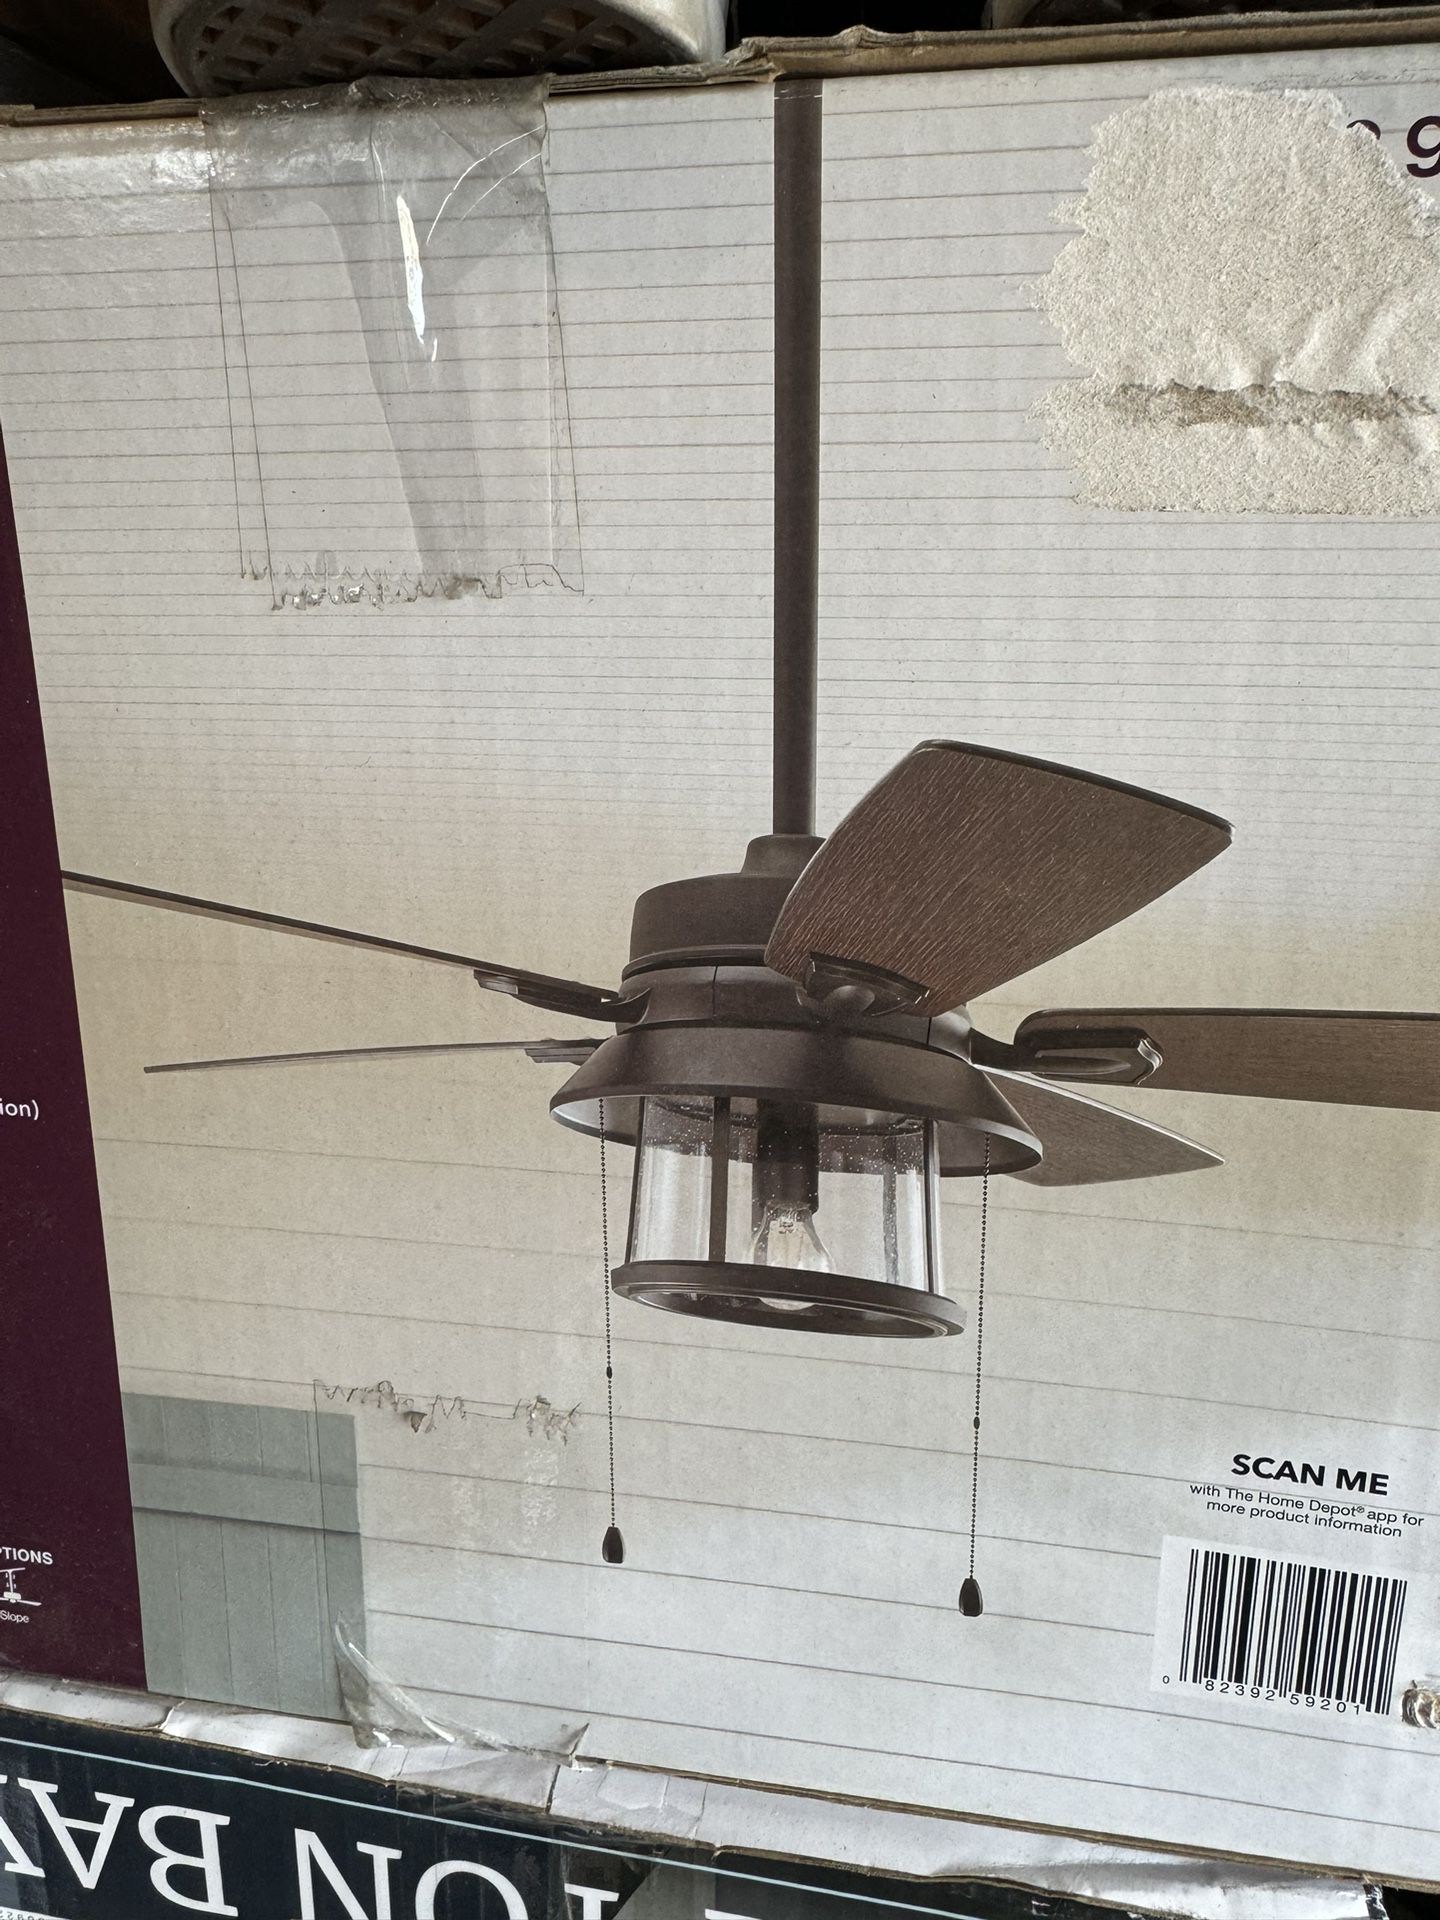 Brand New Ceiling Fans 